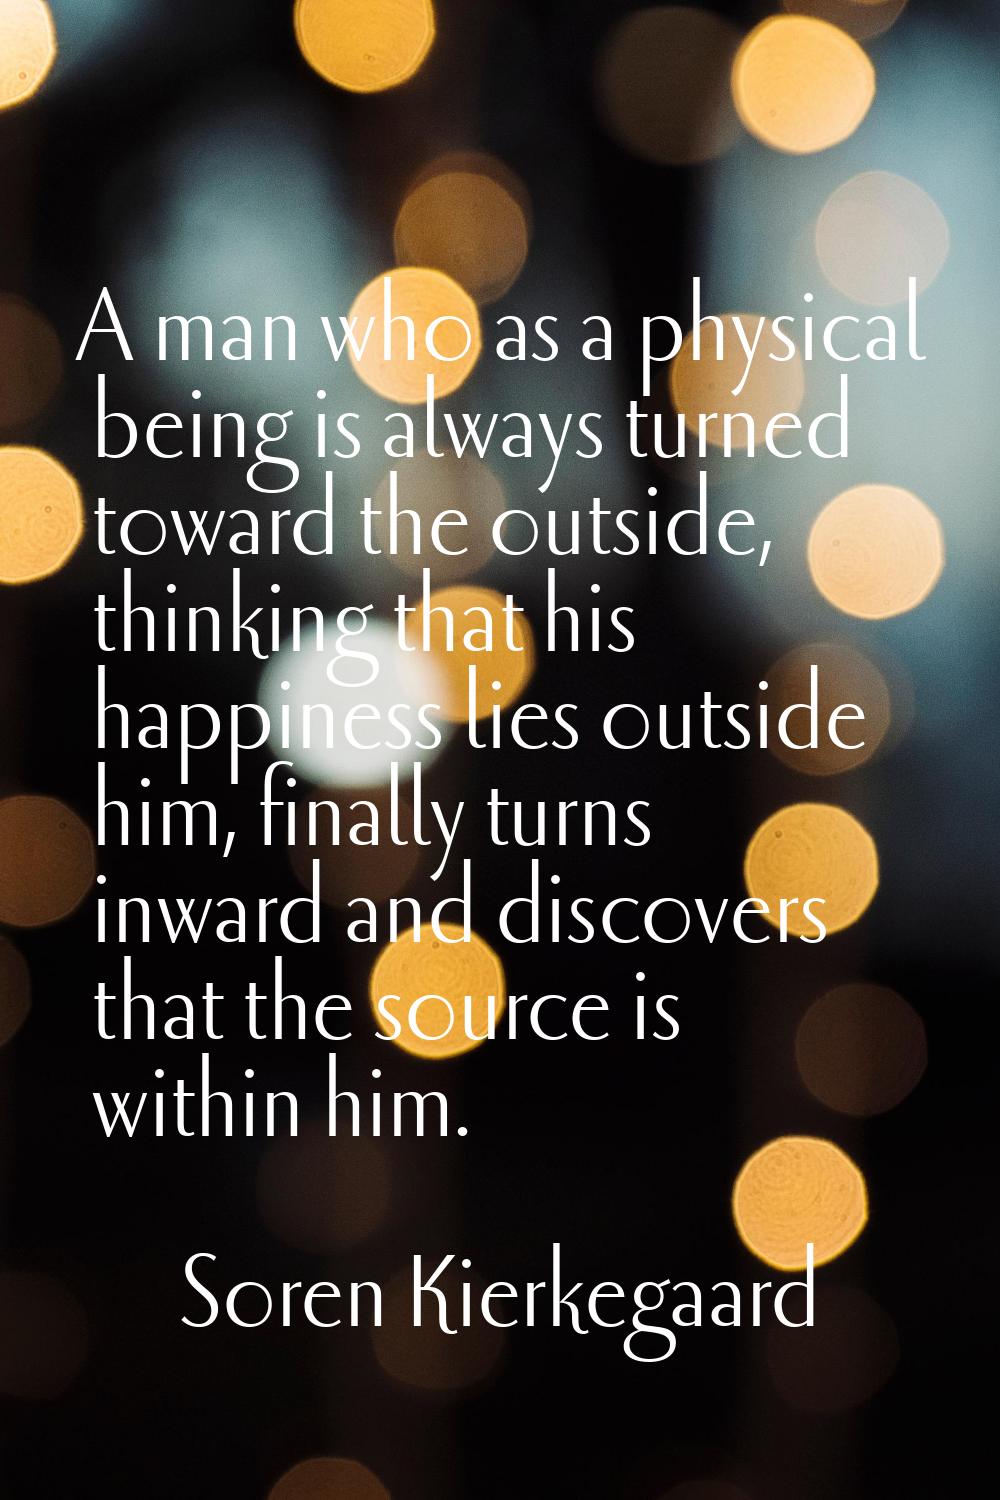 A man who as a physical being is always turned toward the outside, thinking that his happiness lies